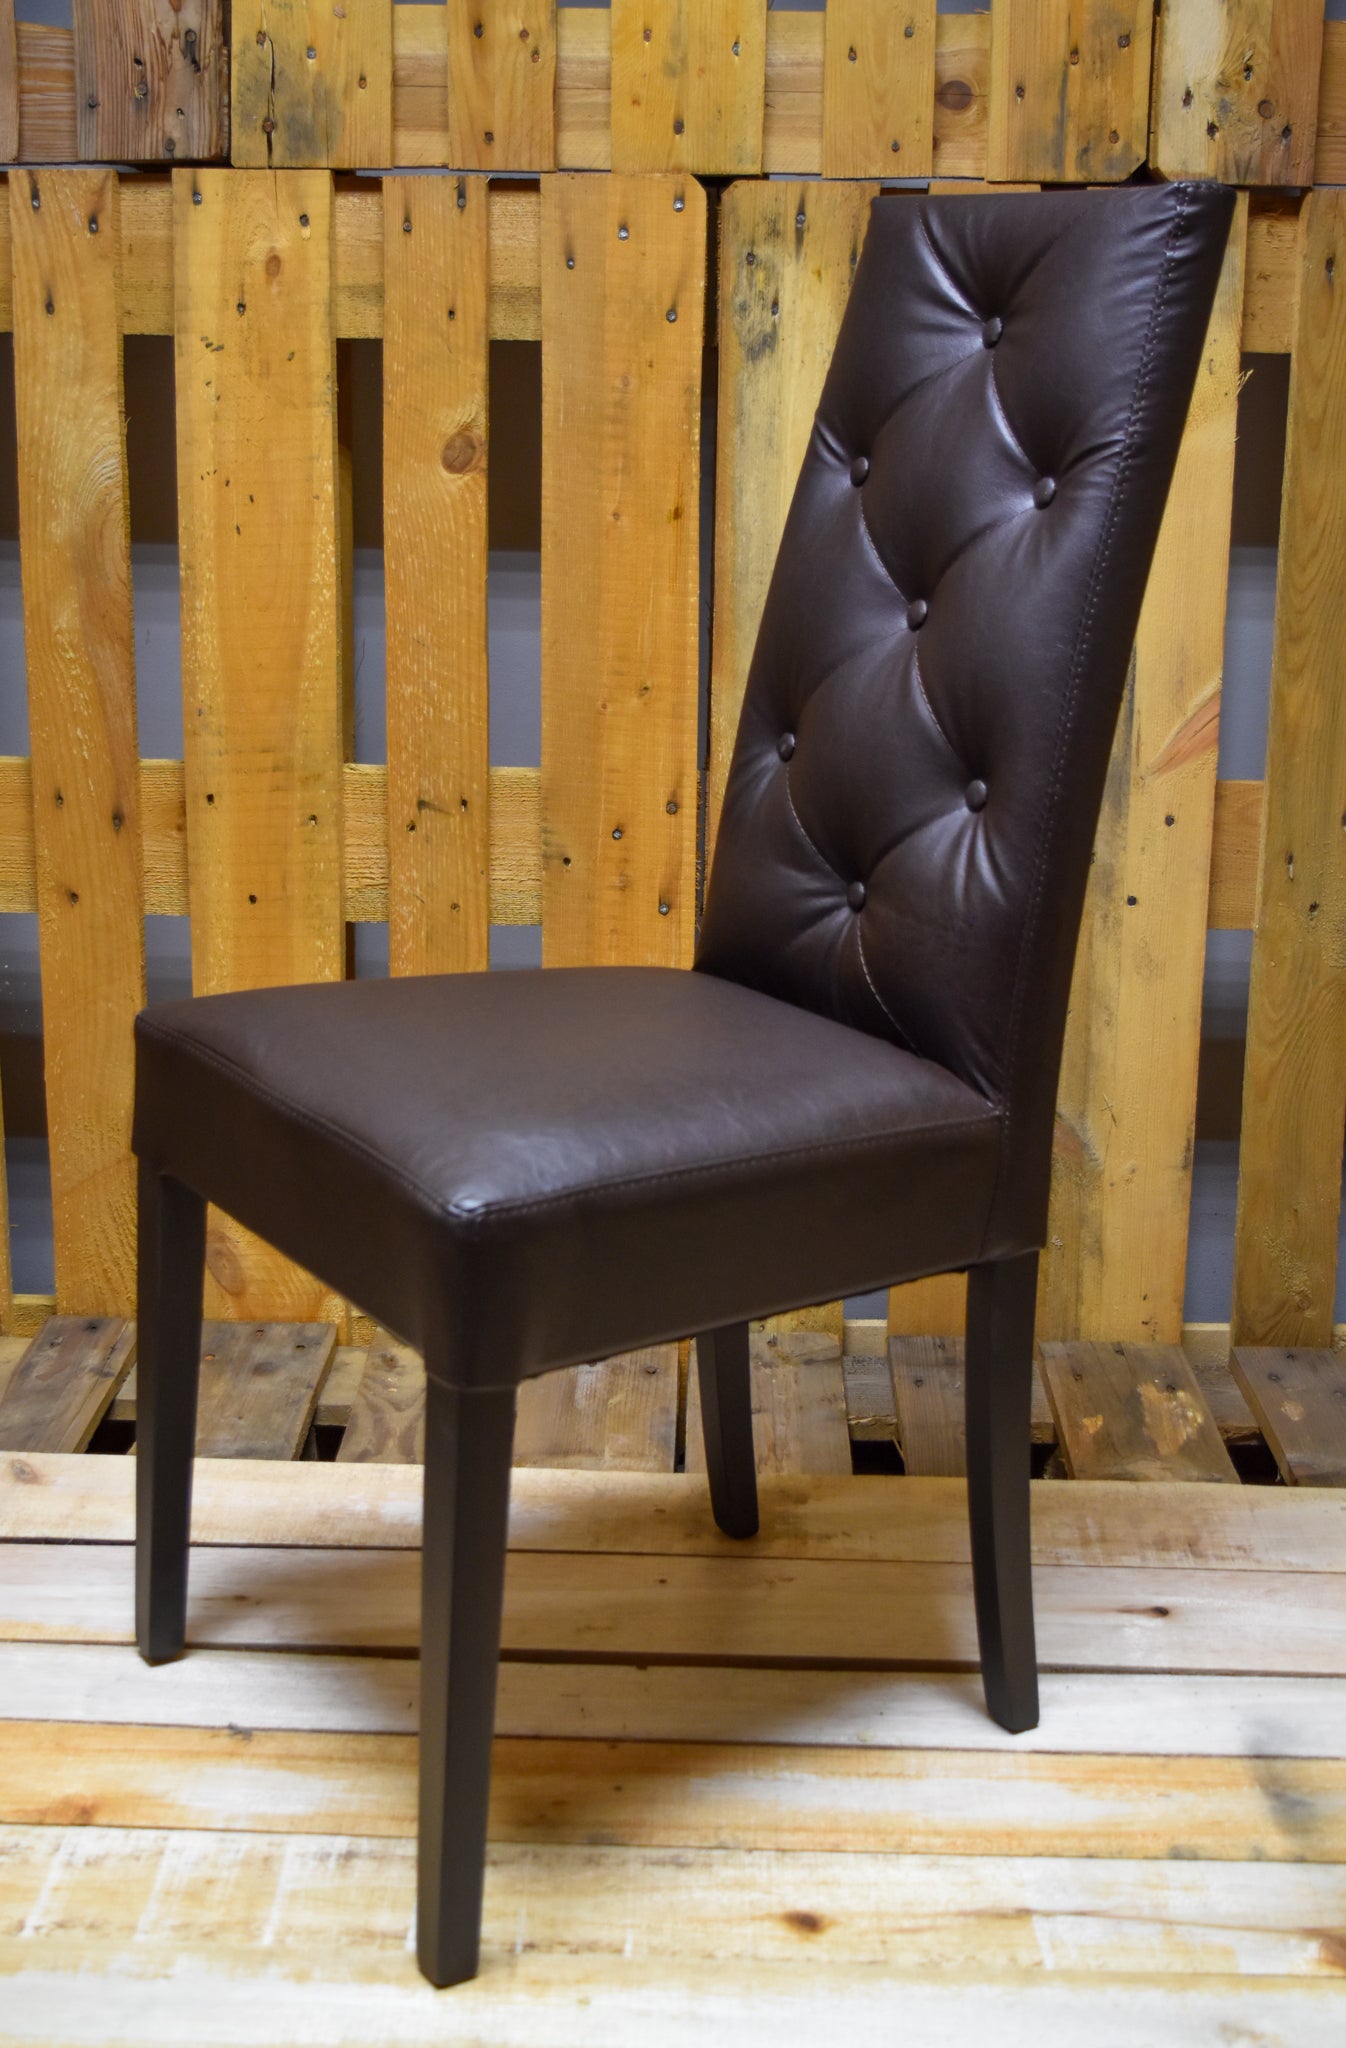 Stock chairs model 35 upholstered in brown imitation leather